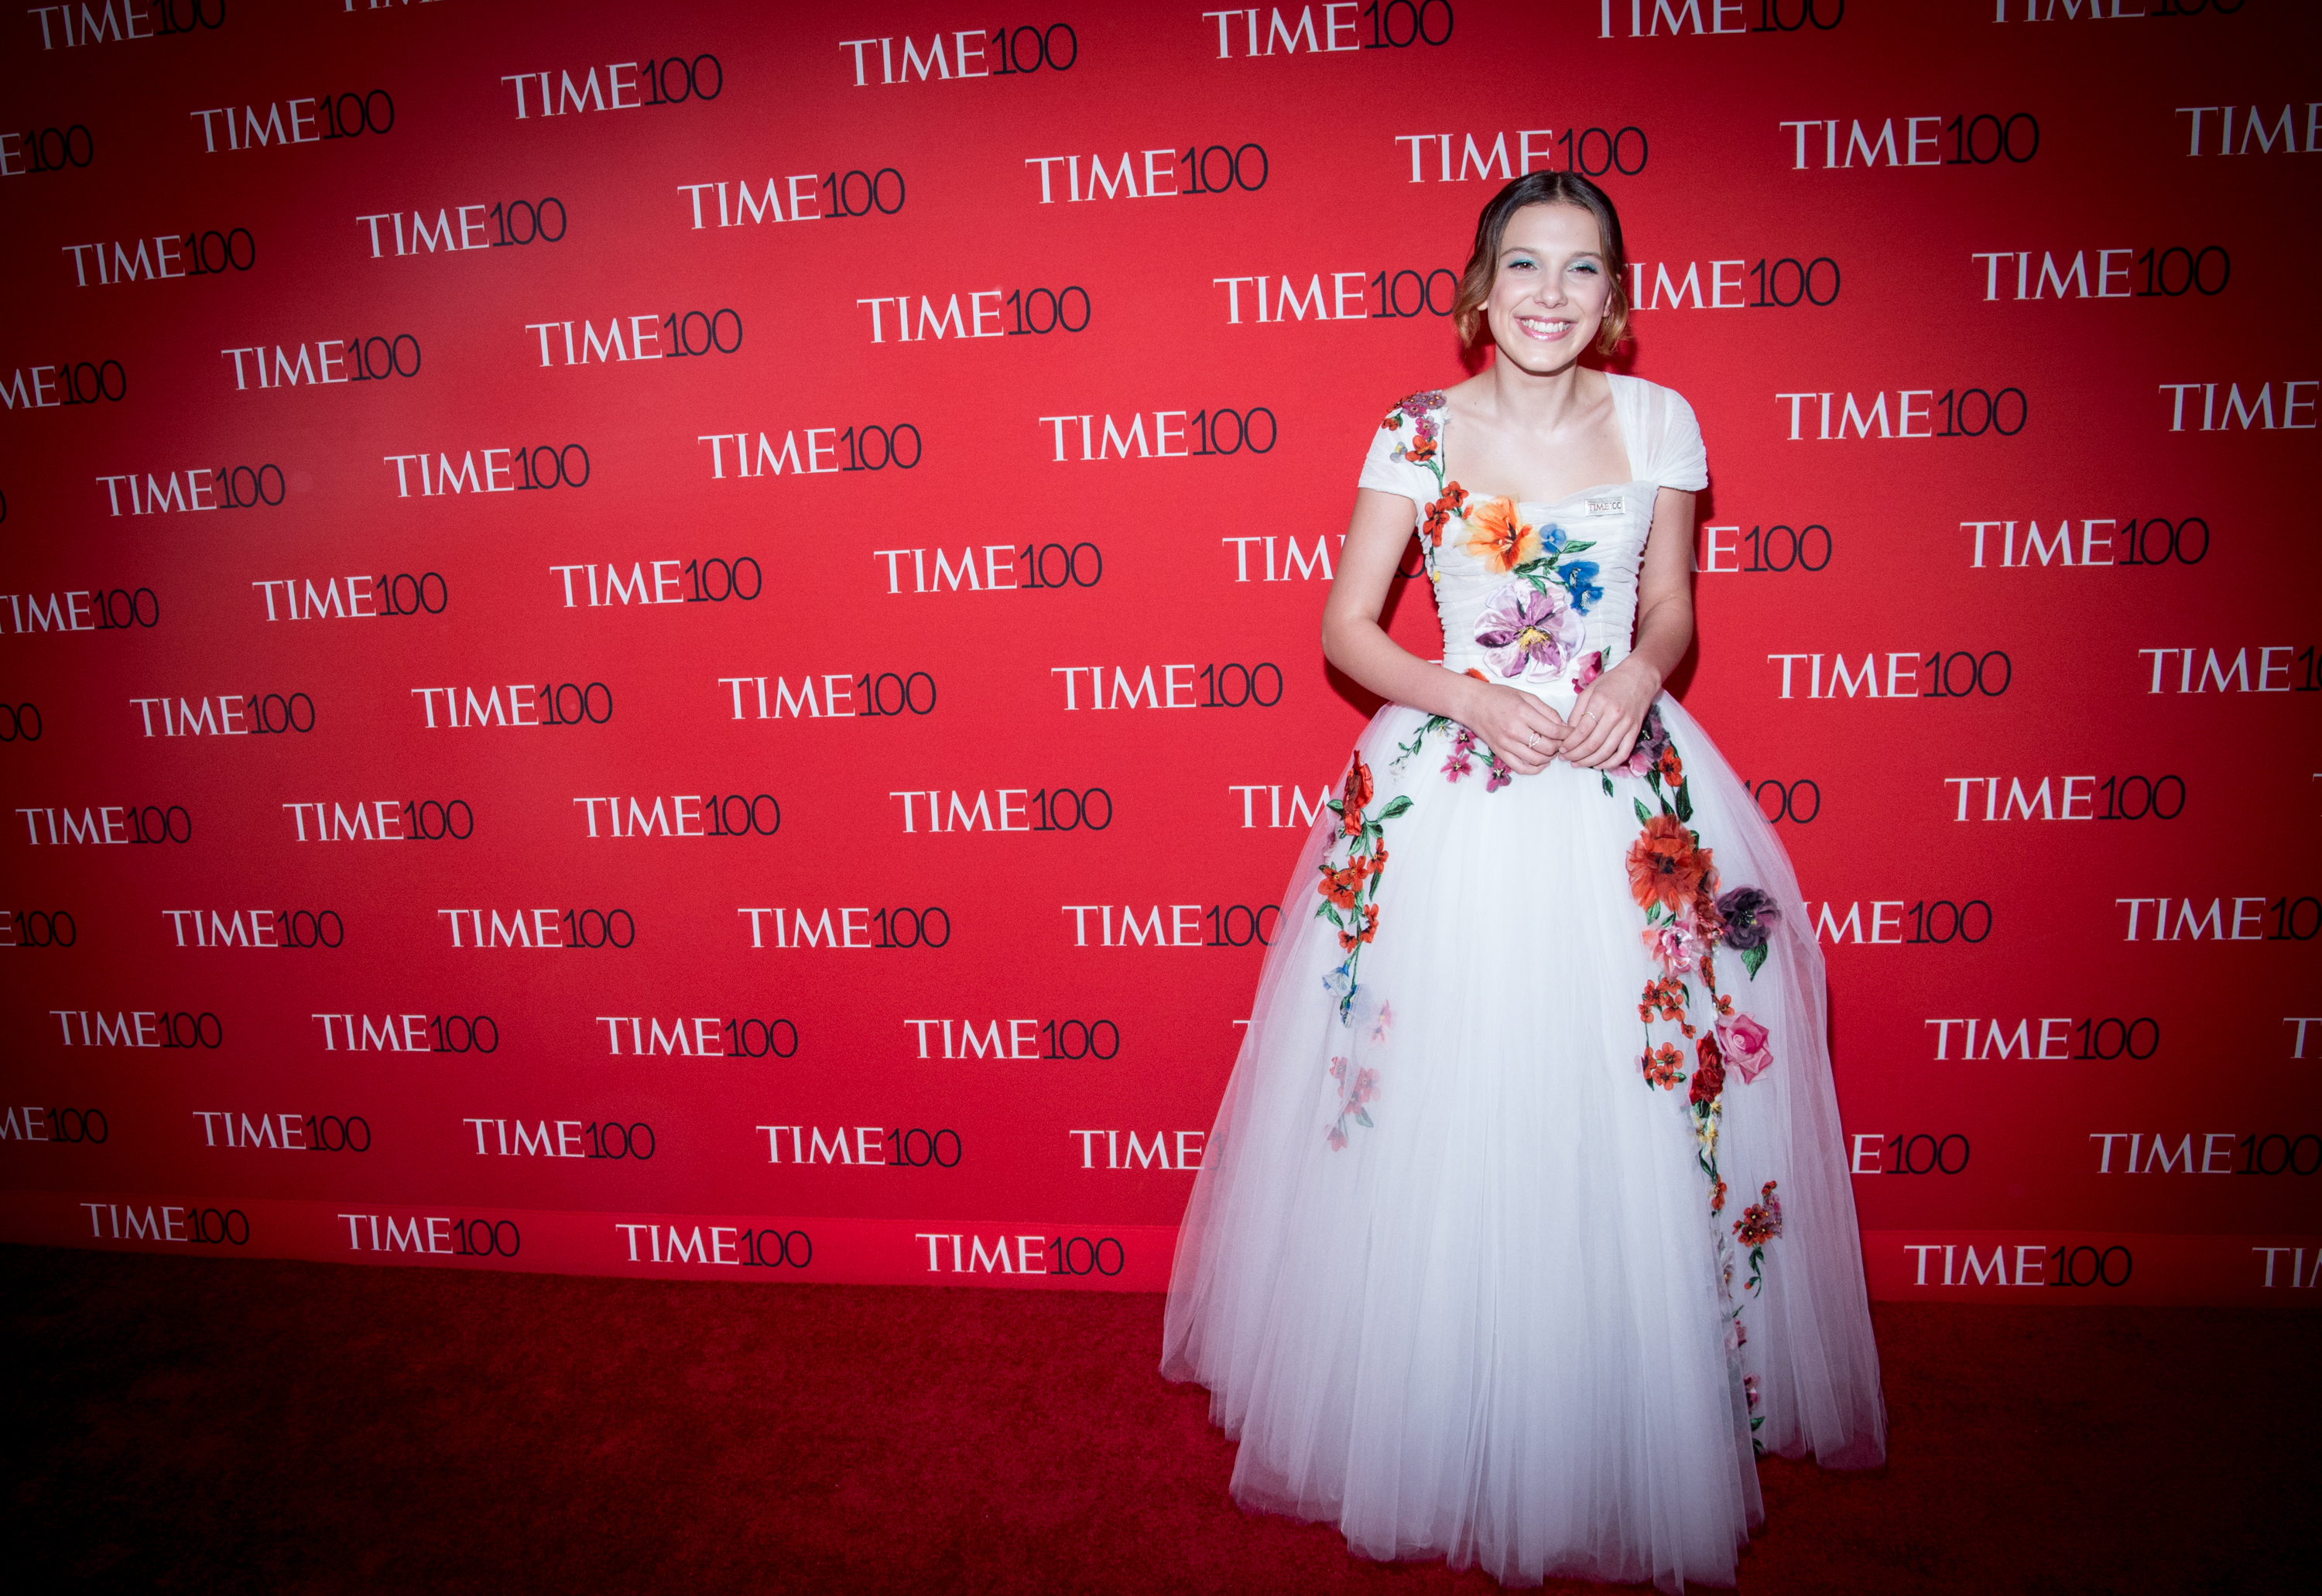 Actor Millie Bobby Brown attends the 2018 Time 100 Gala at Frederick P. Rose Hall, Jazz at Lincoln Center on April 24, 2018 in New York City. (Mark Sagliocco&mdash;WireImage)